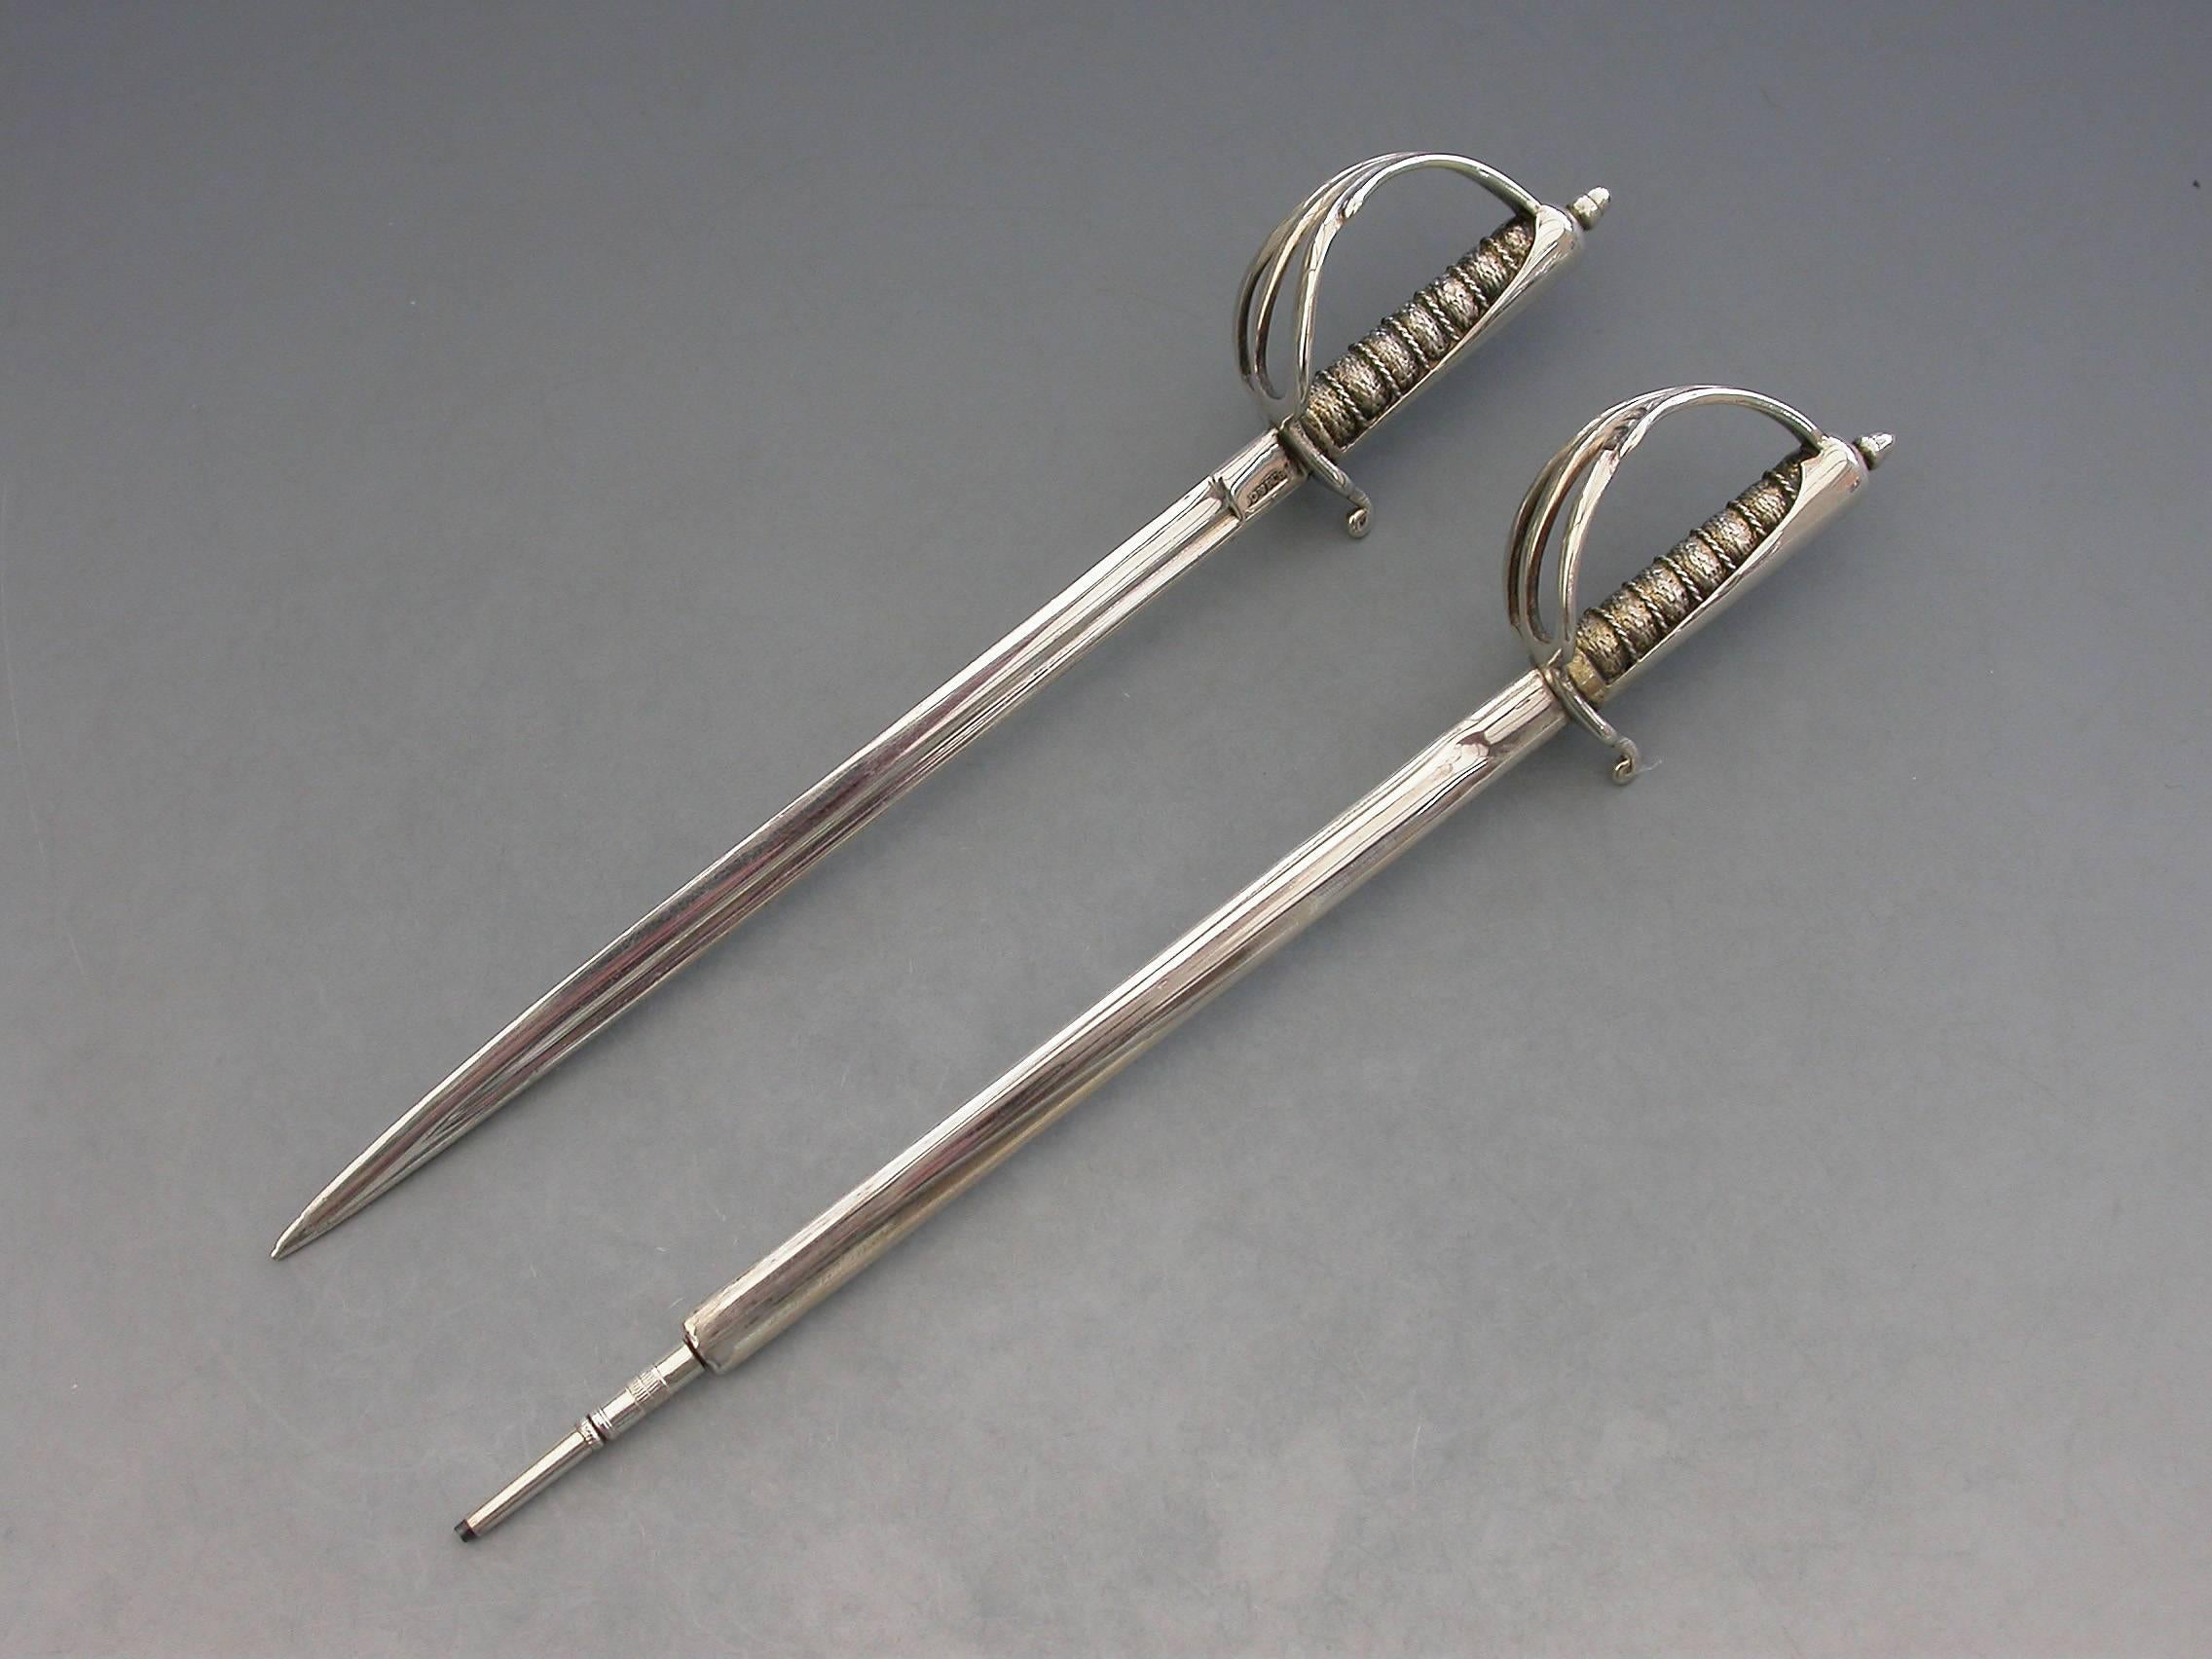 A Victorian silver desk clip mounted on a leather covered wooden base, formed as a crossed pair of British officers dress swords complete with suspension rings and scabbards mounted on a sprung hinged stand. One sword is a propelling pencil and the